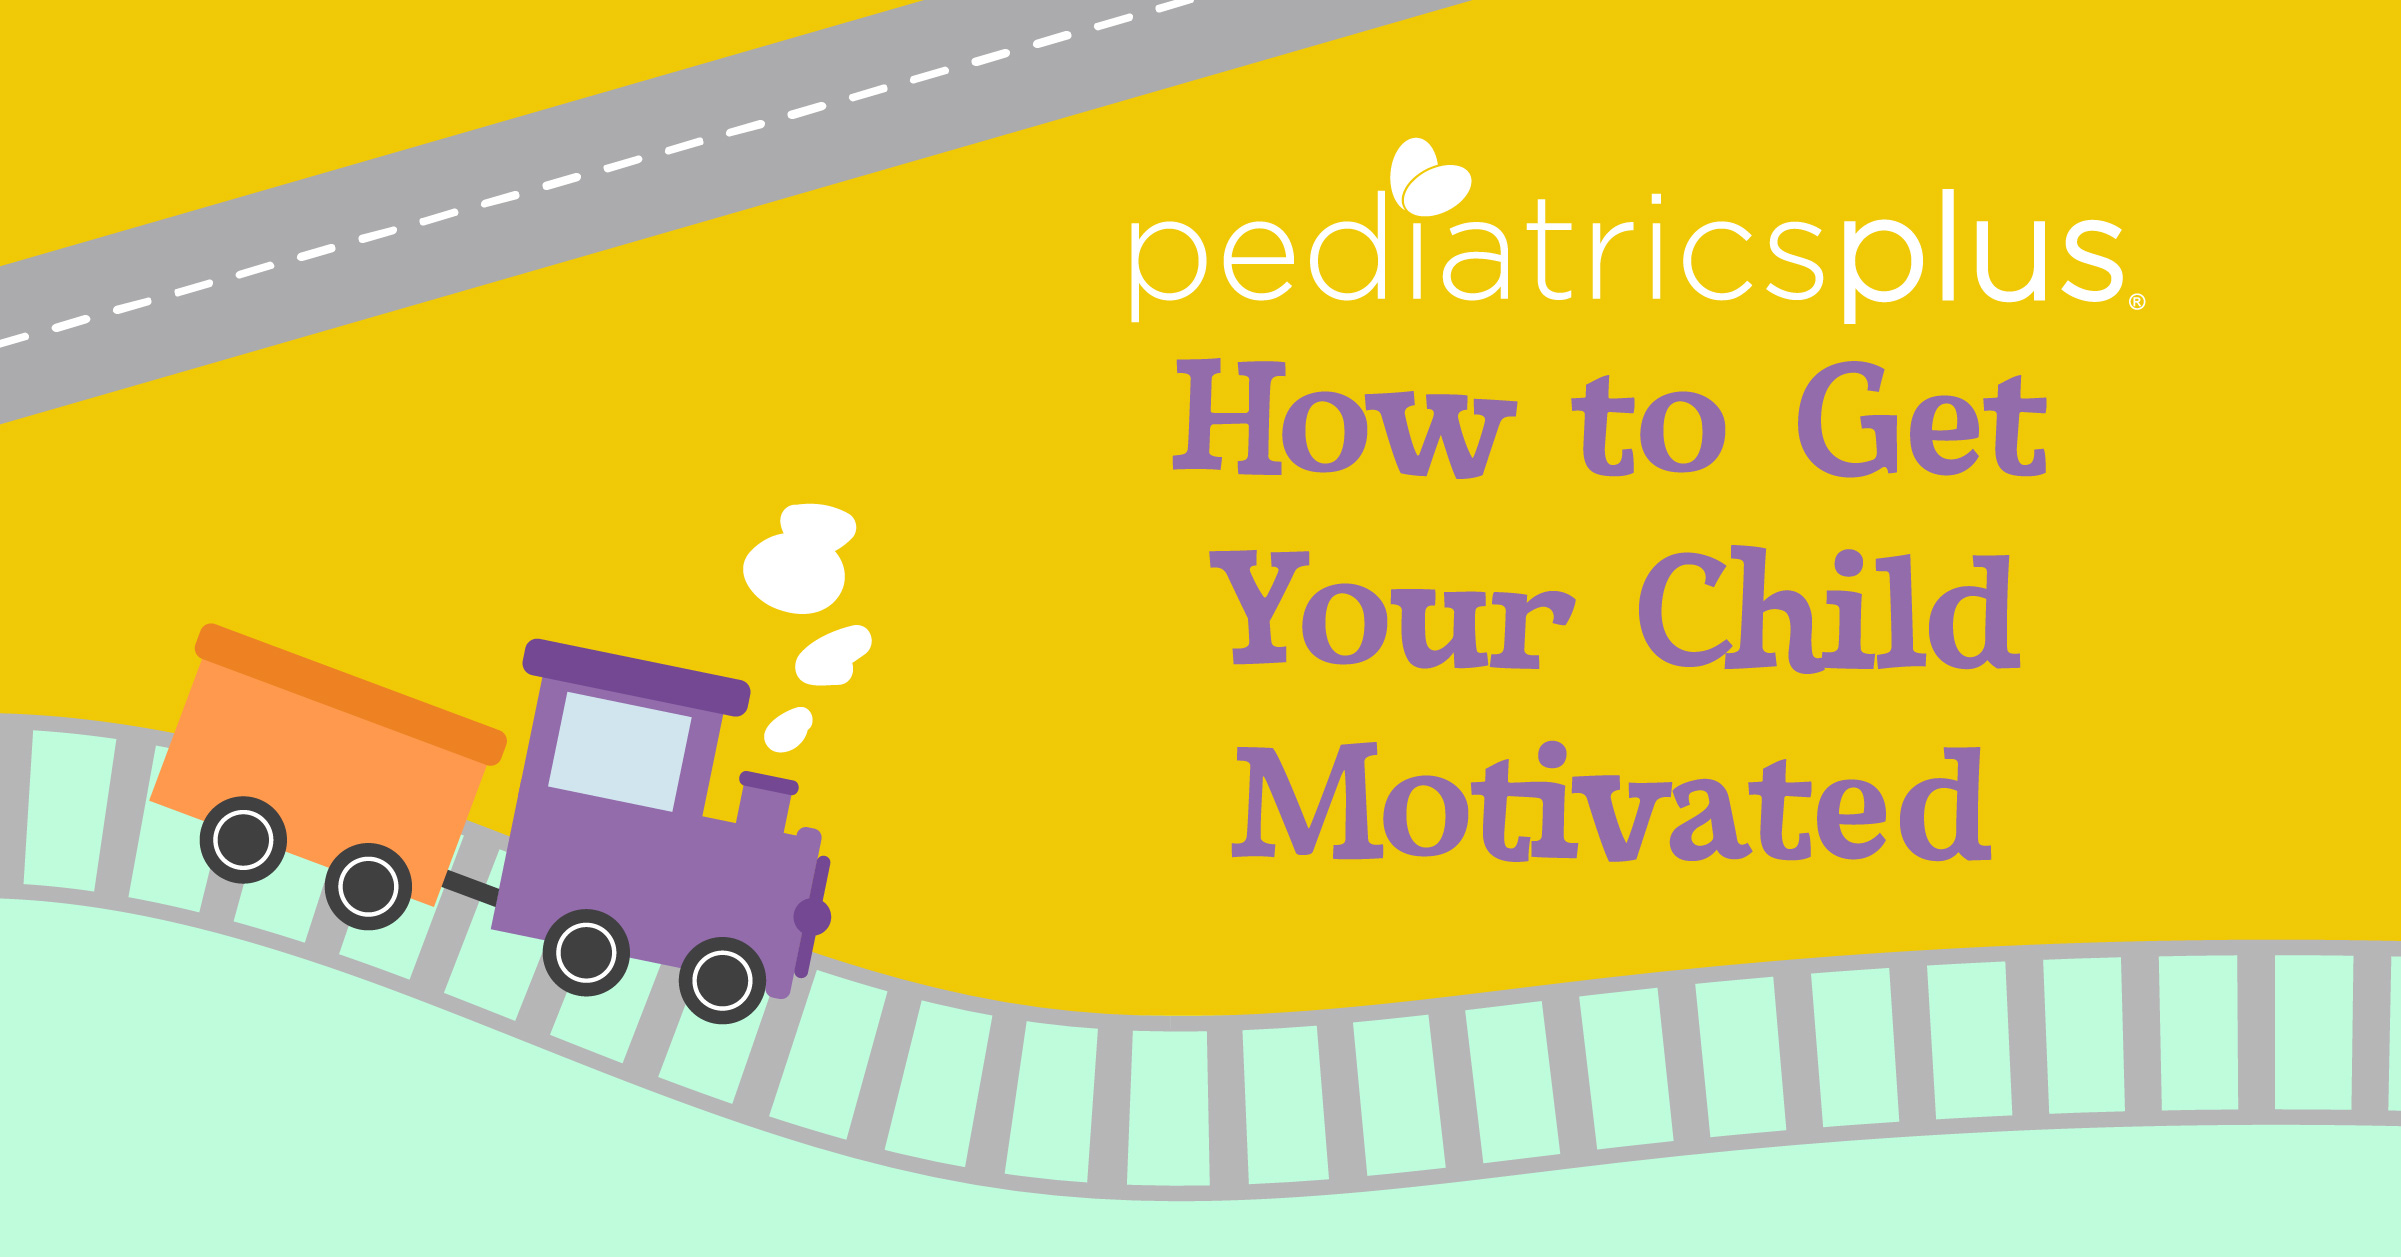 How to Get Your Child Motivated